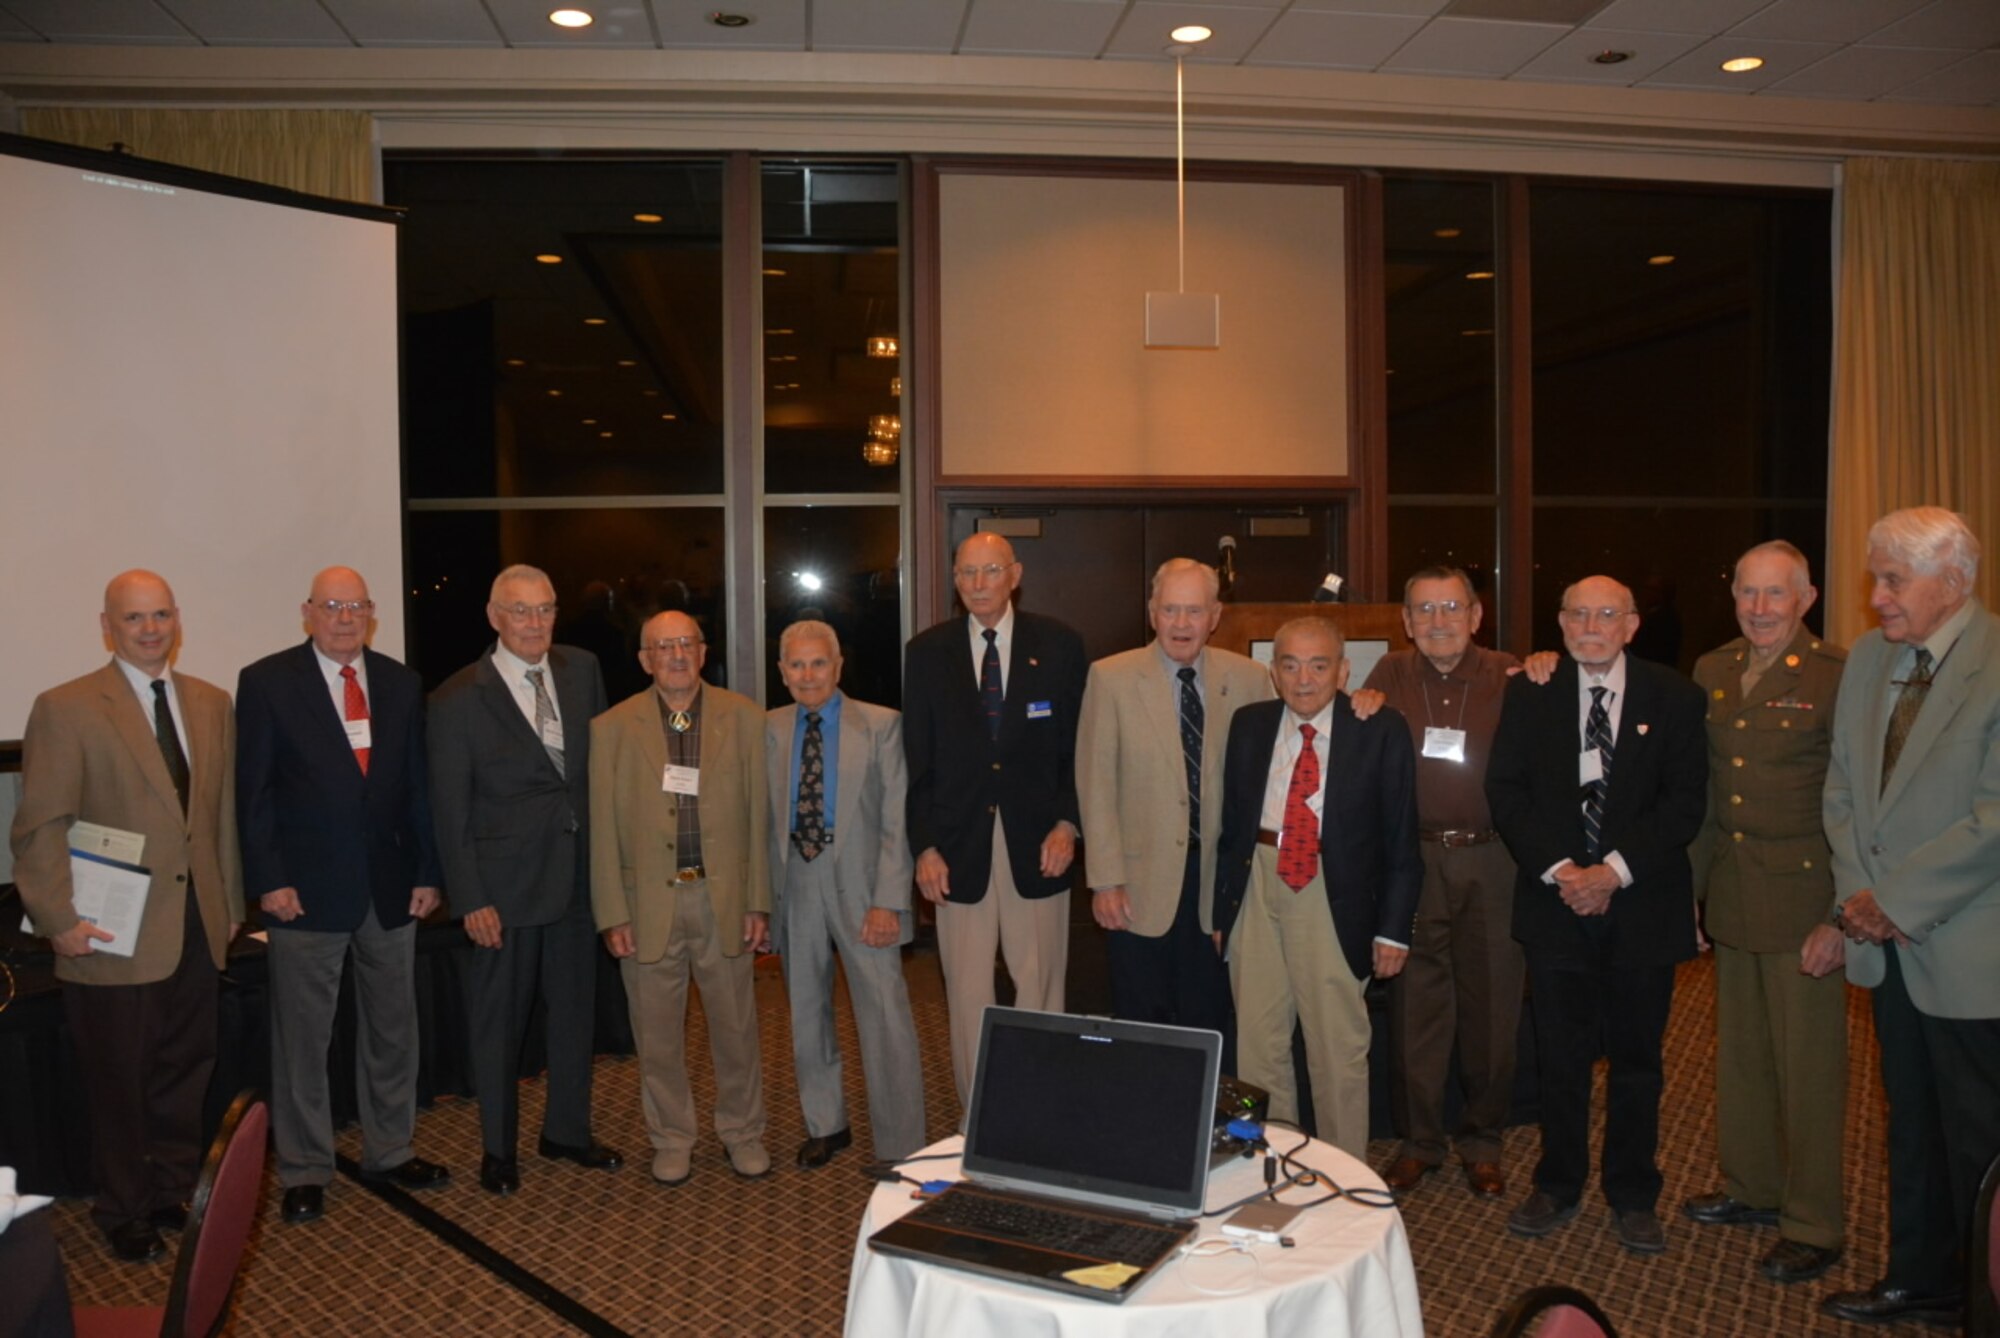 Combat veterans of the 381st Bombardment Group stand to be honored at the 381st Bomb Group (H) Memorial Association’s Banquet in Portland, Oregon, Sept. 6,  2014. The men are, from left to right, guest speaker Terrence Popravak Jr., and 381BG combat veterans Joe Waddell, Darrell Blizzard, Herb Kwart, Lou Perrone, Dick Schneider, Jim Gray, Alex Strohmayer, Leo Foley, Leonard Spivey, Burton Hill, accompanied by a fellow B-17 veteran, Don Hayes  (97th Bomb Group).  (Courtesy Dr. Kevin Wilson, 381BGMA Secretary-Treasurer/Historian)